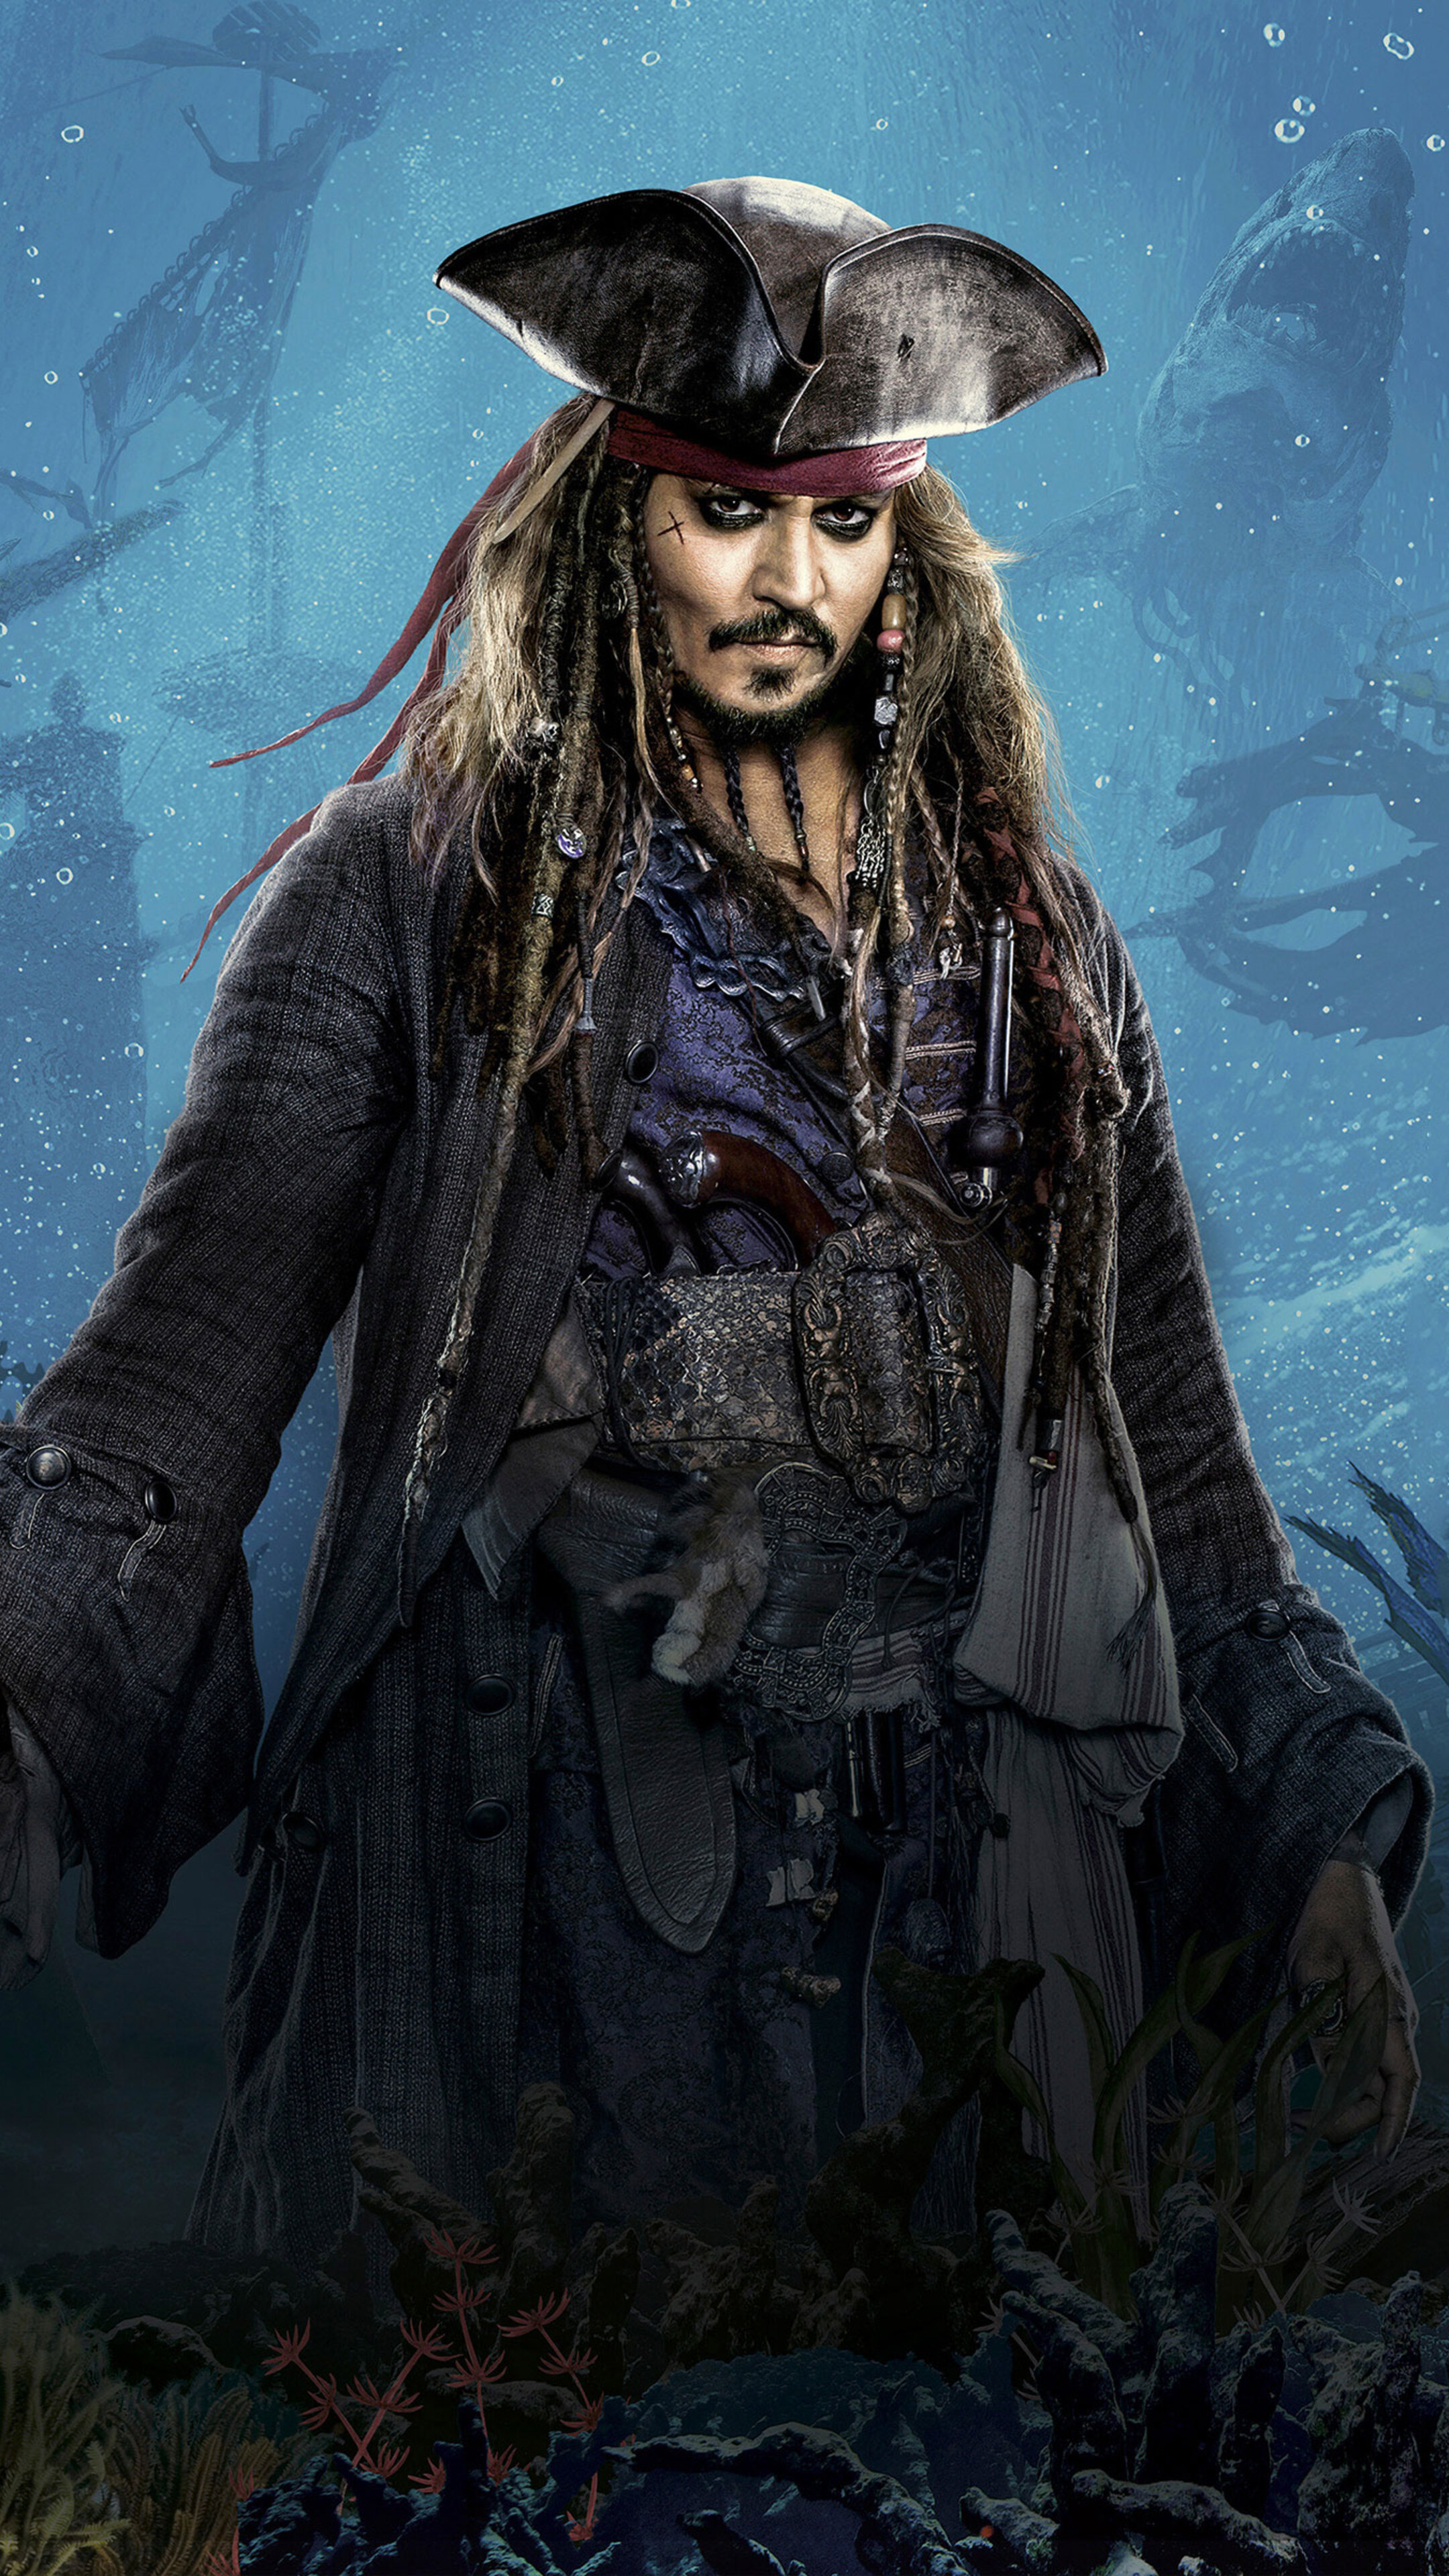 Pirates of the Caribbean: Dead Men Tell No Tales, Captain Jack Sparrow pursued by old rival Captain Salazar. 2160x3840 4K Background.